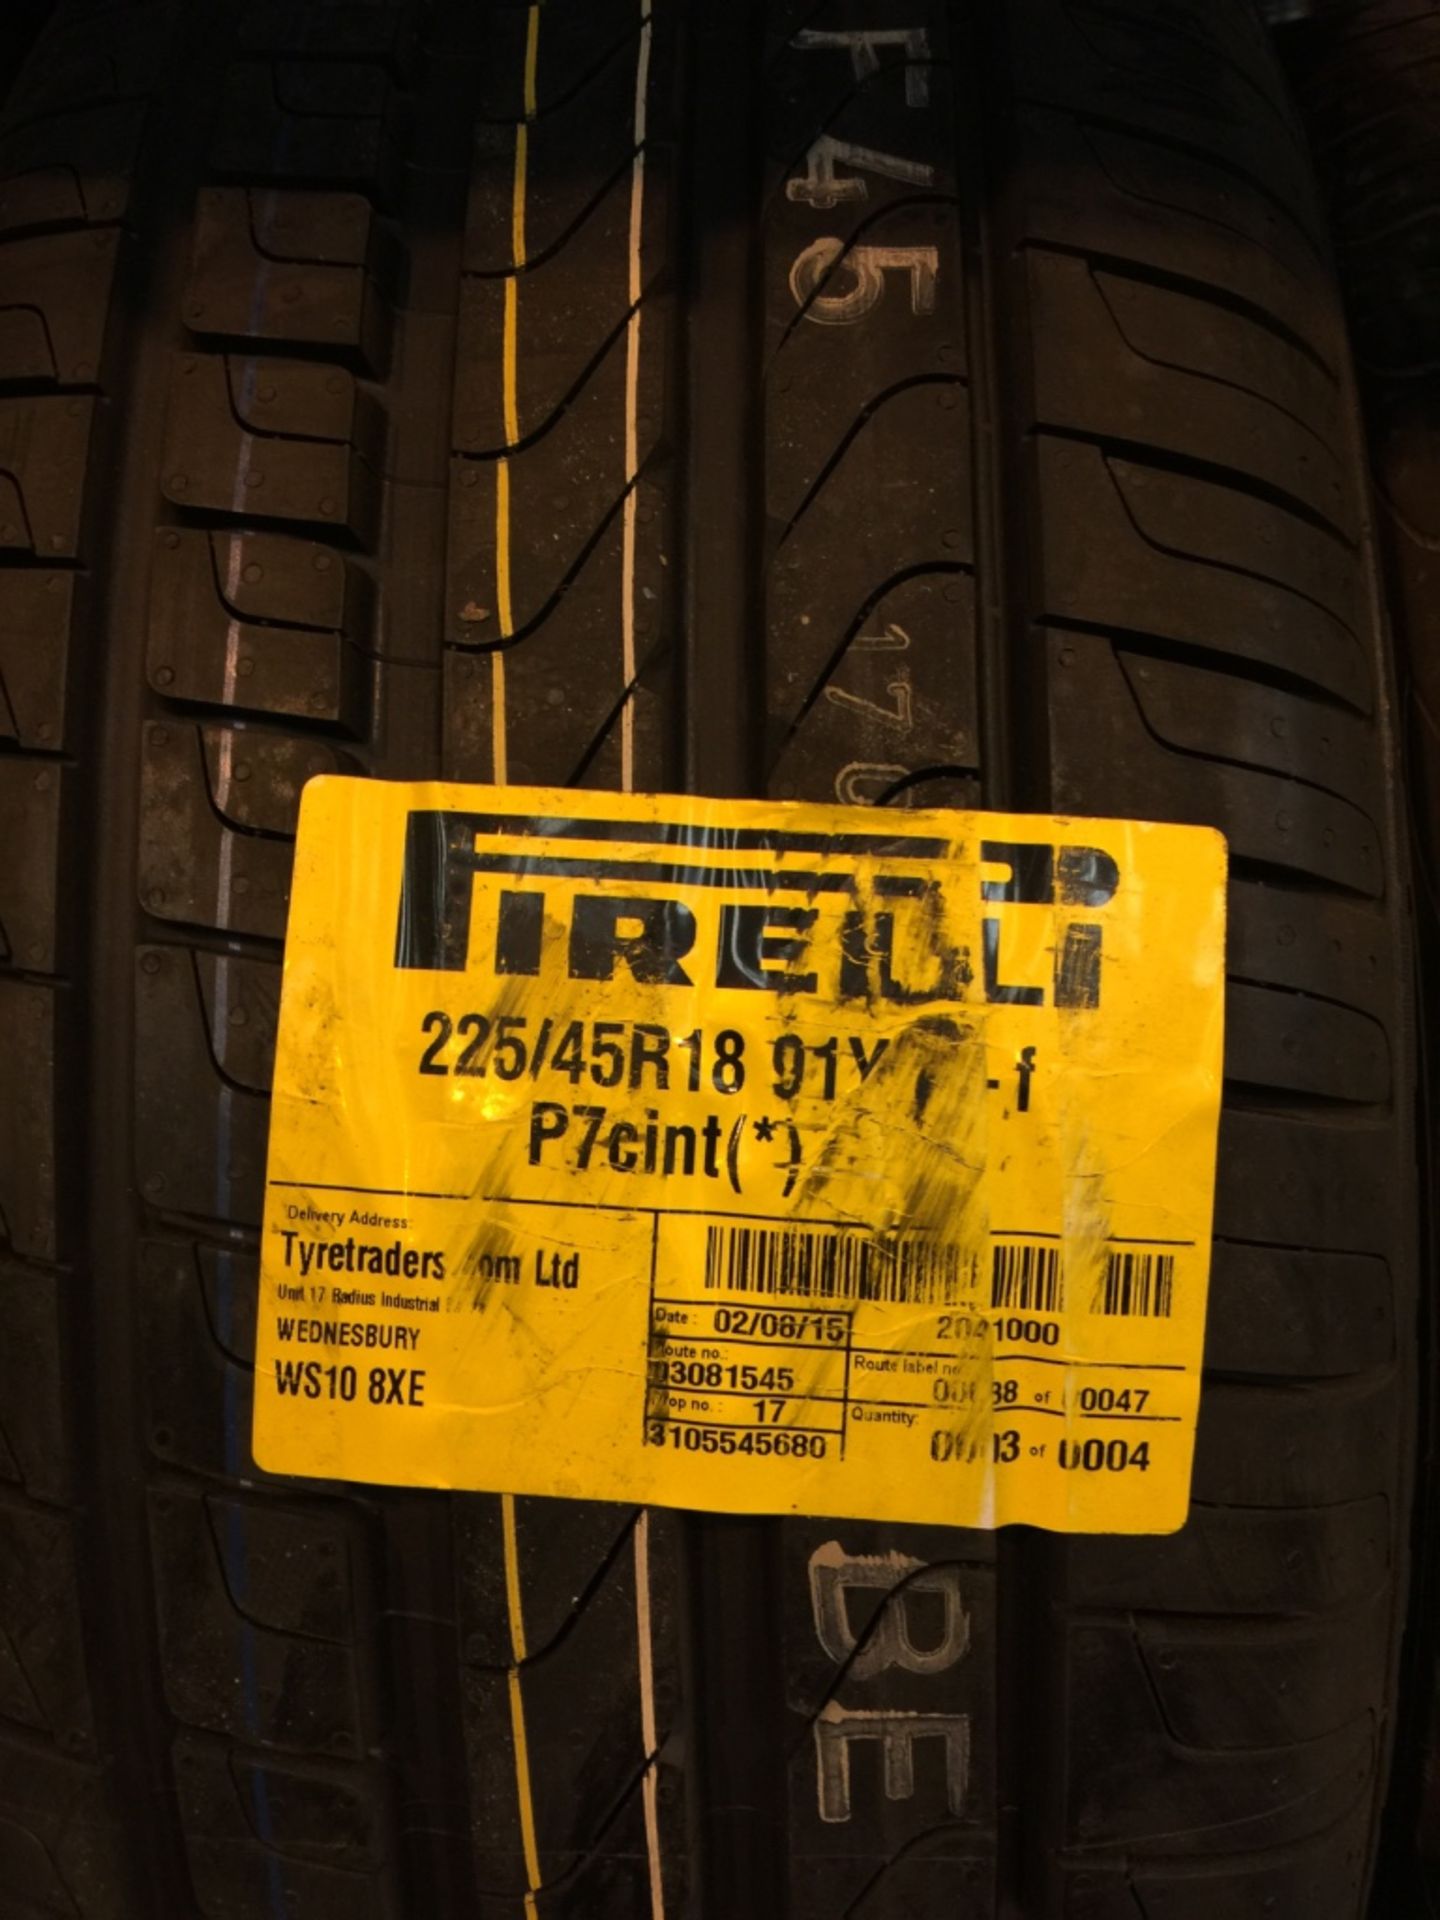 54: Pirelli Tyres Car & 4X4 - Many Large Sizes to include 18,19,21" Please see further Pictures ( - Image 29 of 55